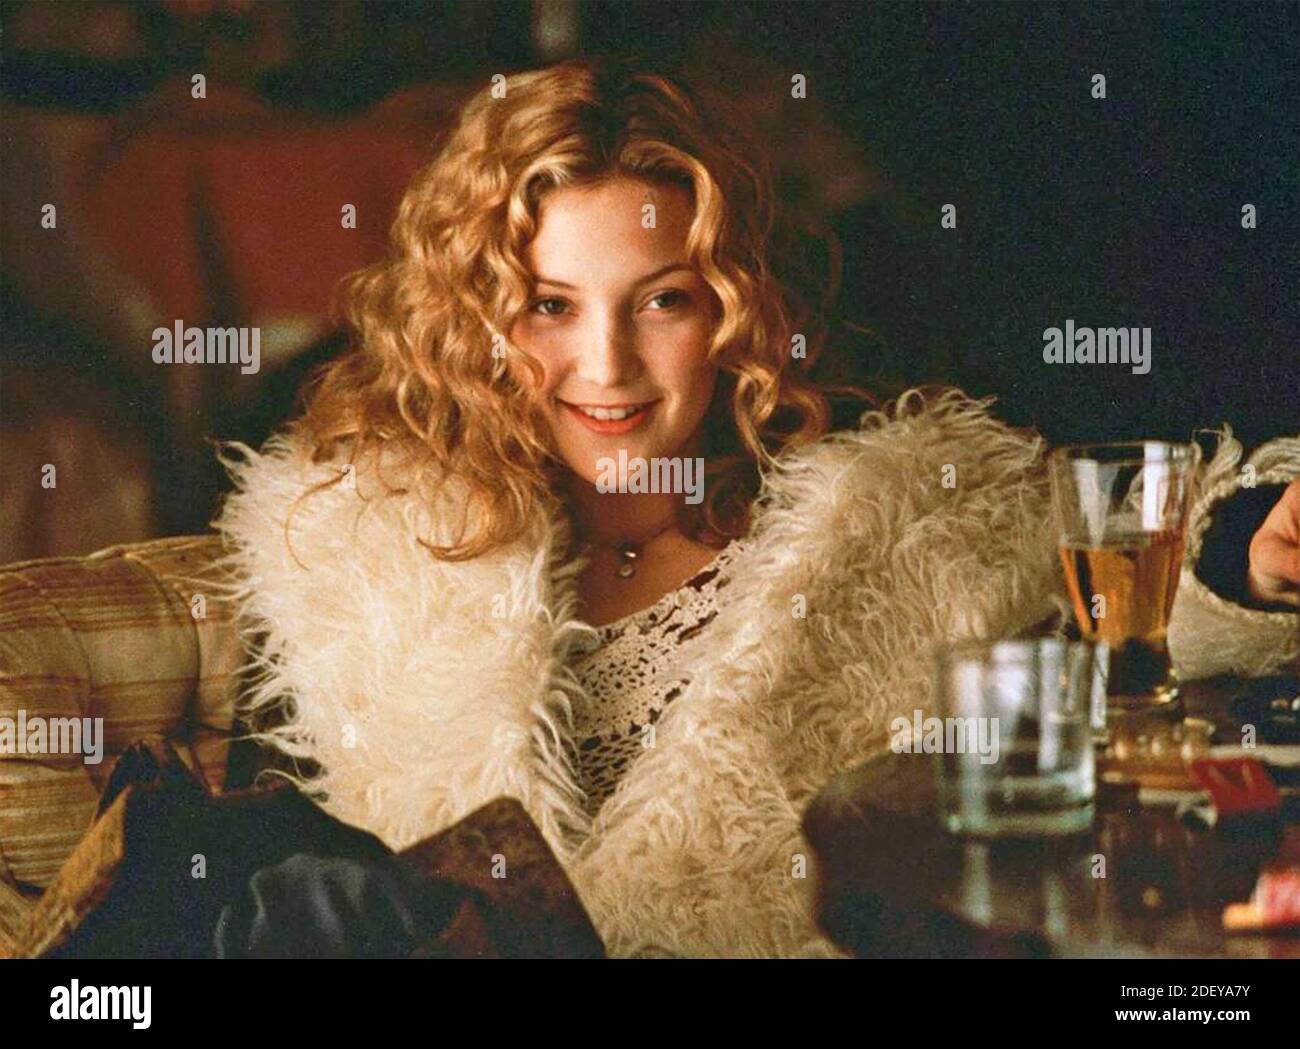 ALMOST FAMOUS 2000 Sony Pictures Releasing film with Kate Hudson Stock Photo